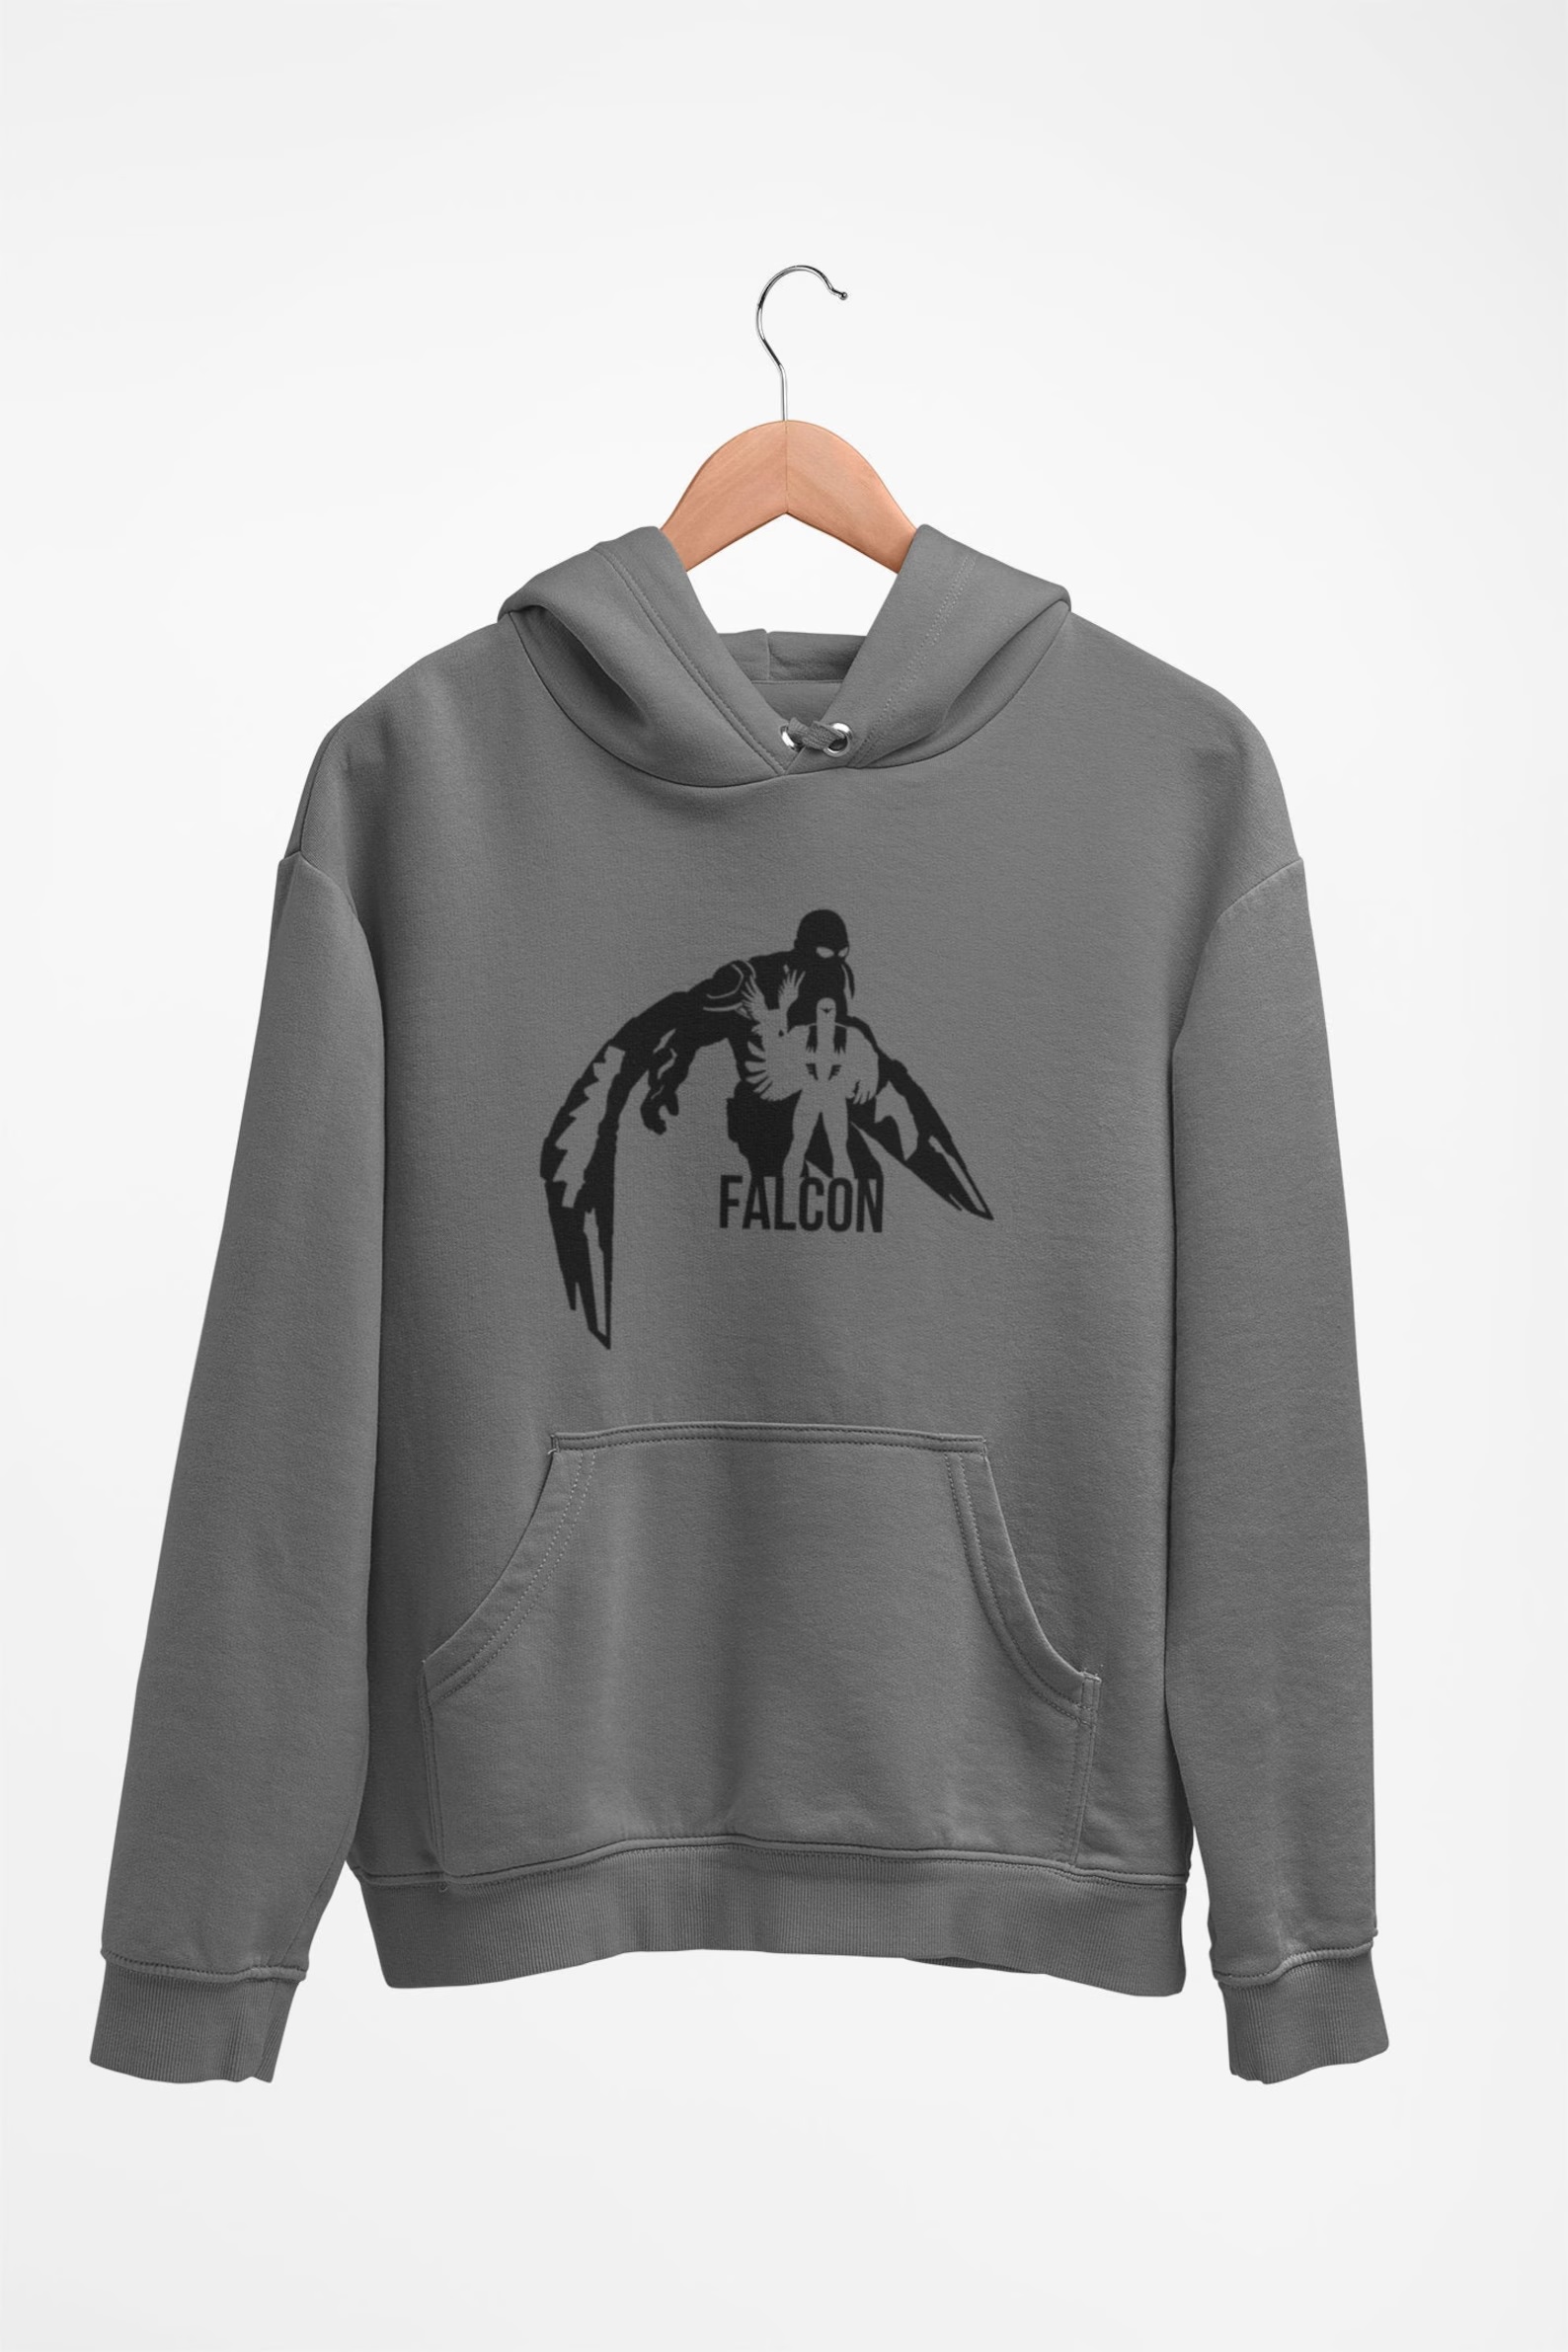 A gray hoodie with two superimposed silhouettes of the Falcon. The word "Falcon" is printed underneath